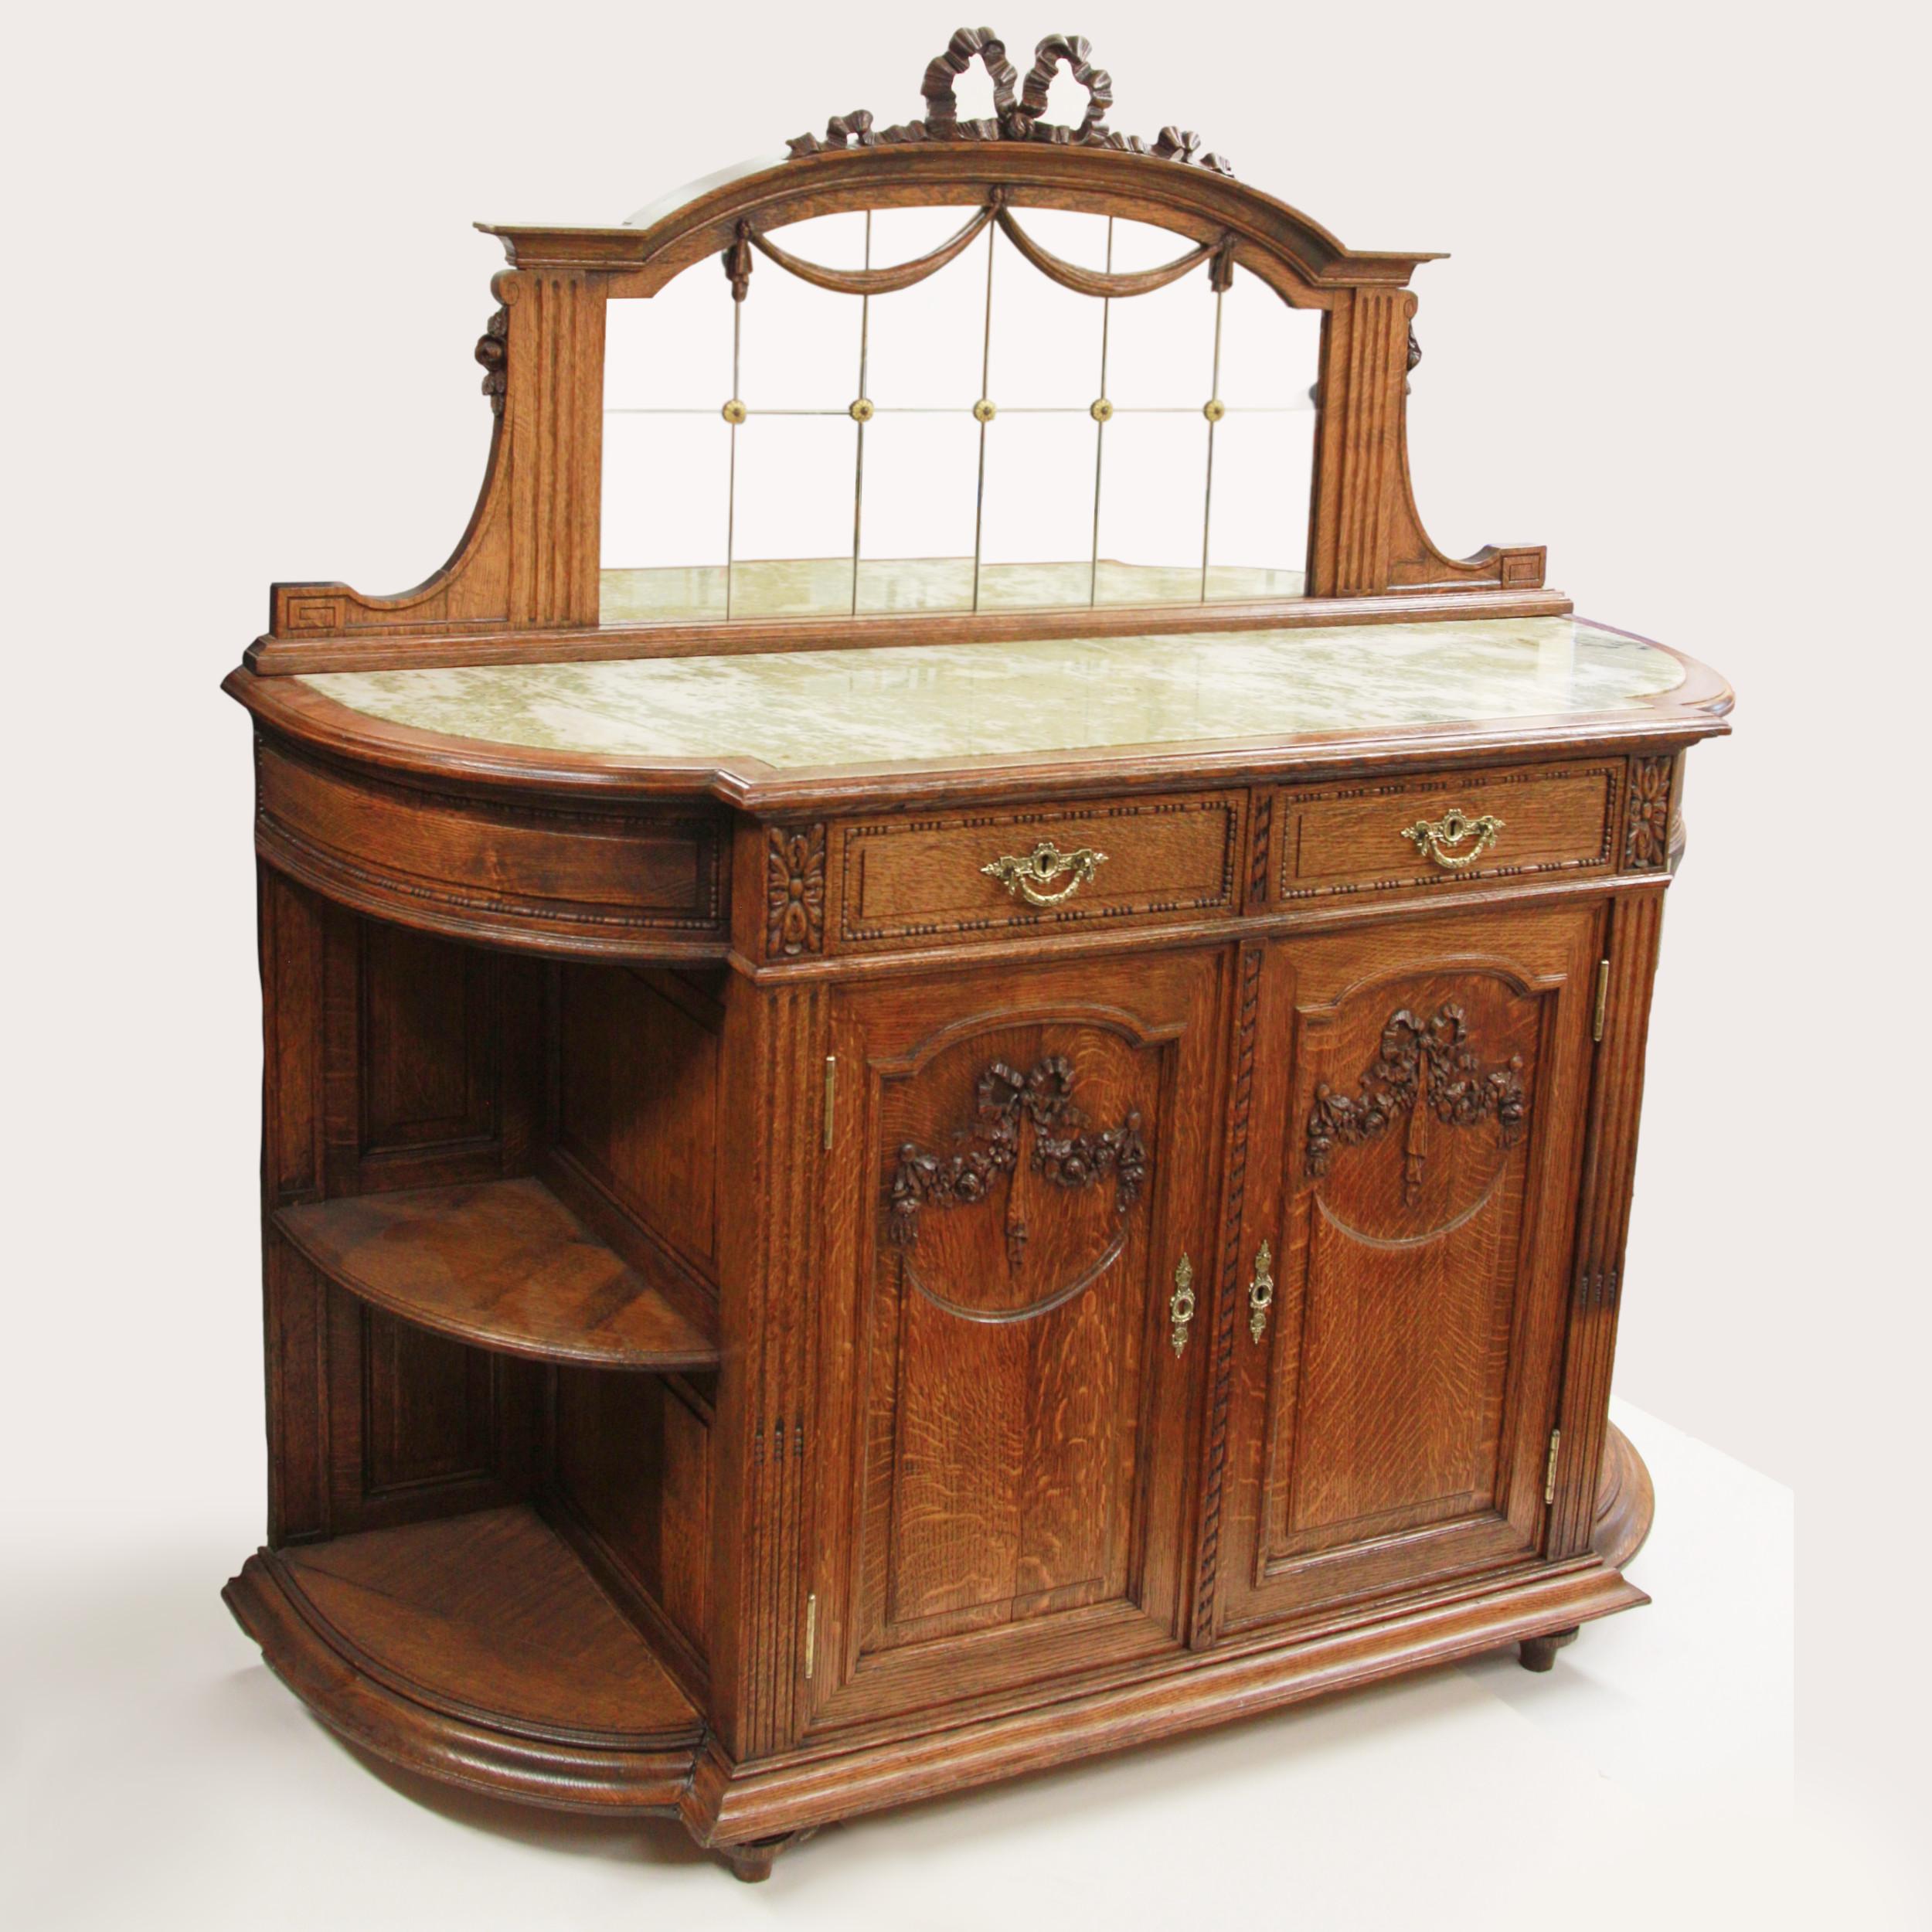 Stunning turn-of-the-century Dutch Buffet

Features include:

- Solid flamed oak construction
- High-relief carving throughout
- Green & white inset marble top
- (2) Drawers
- (2) Doors
- (1) Interior shelf
- (4) external shelves
- Solid brass